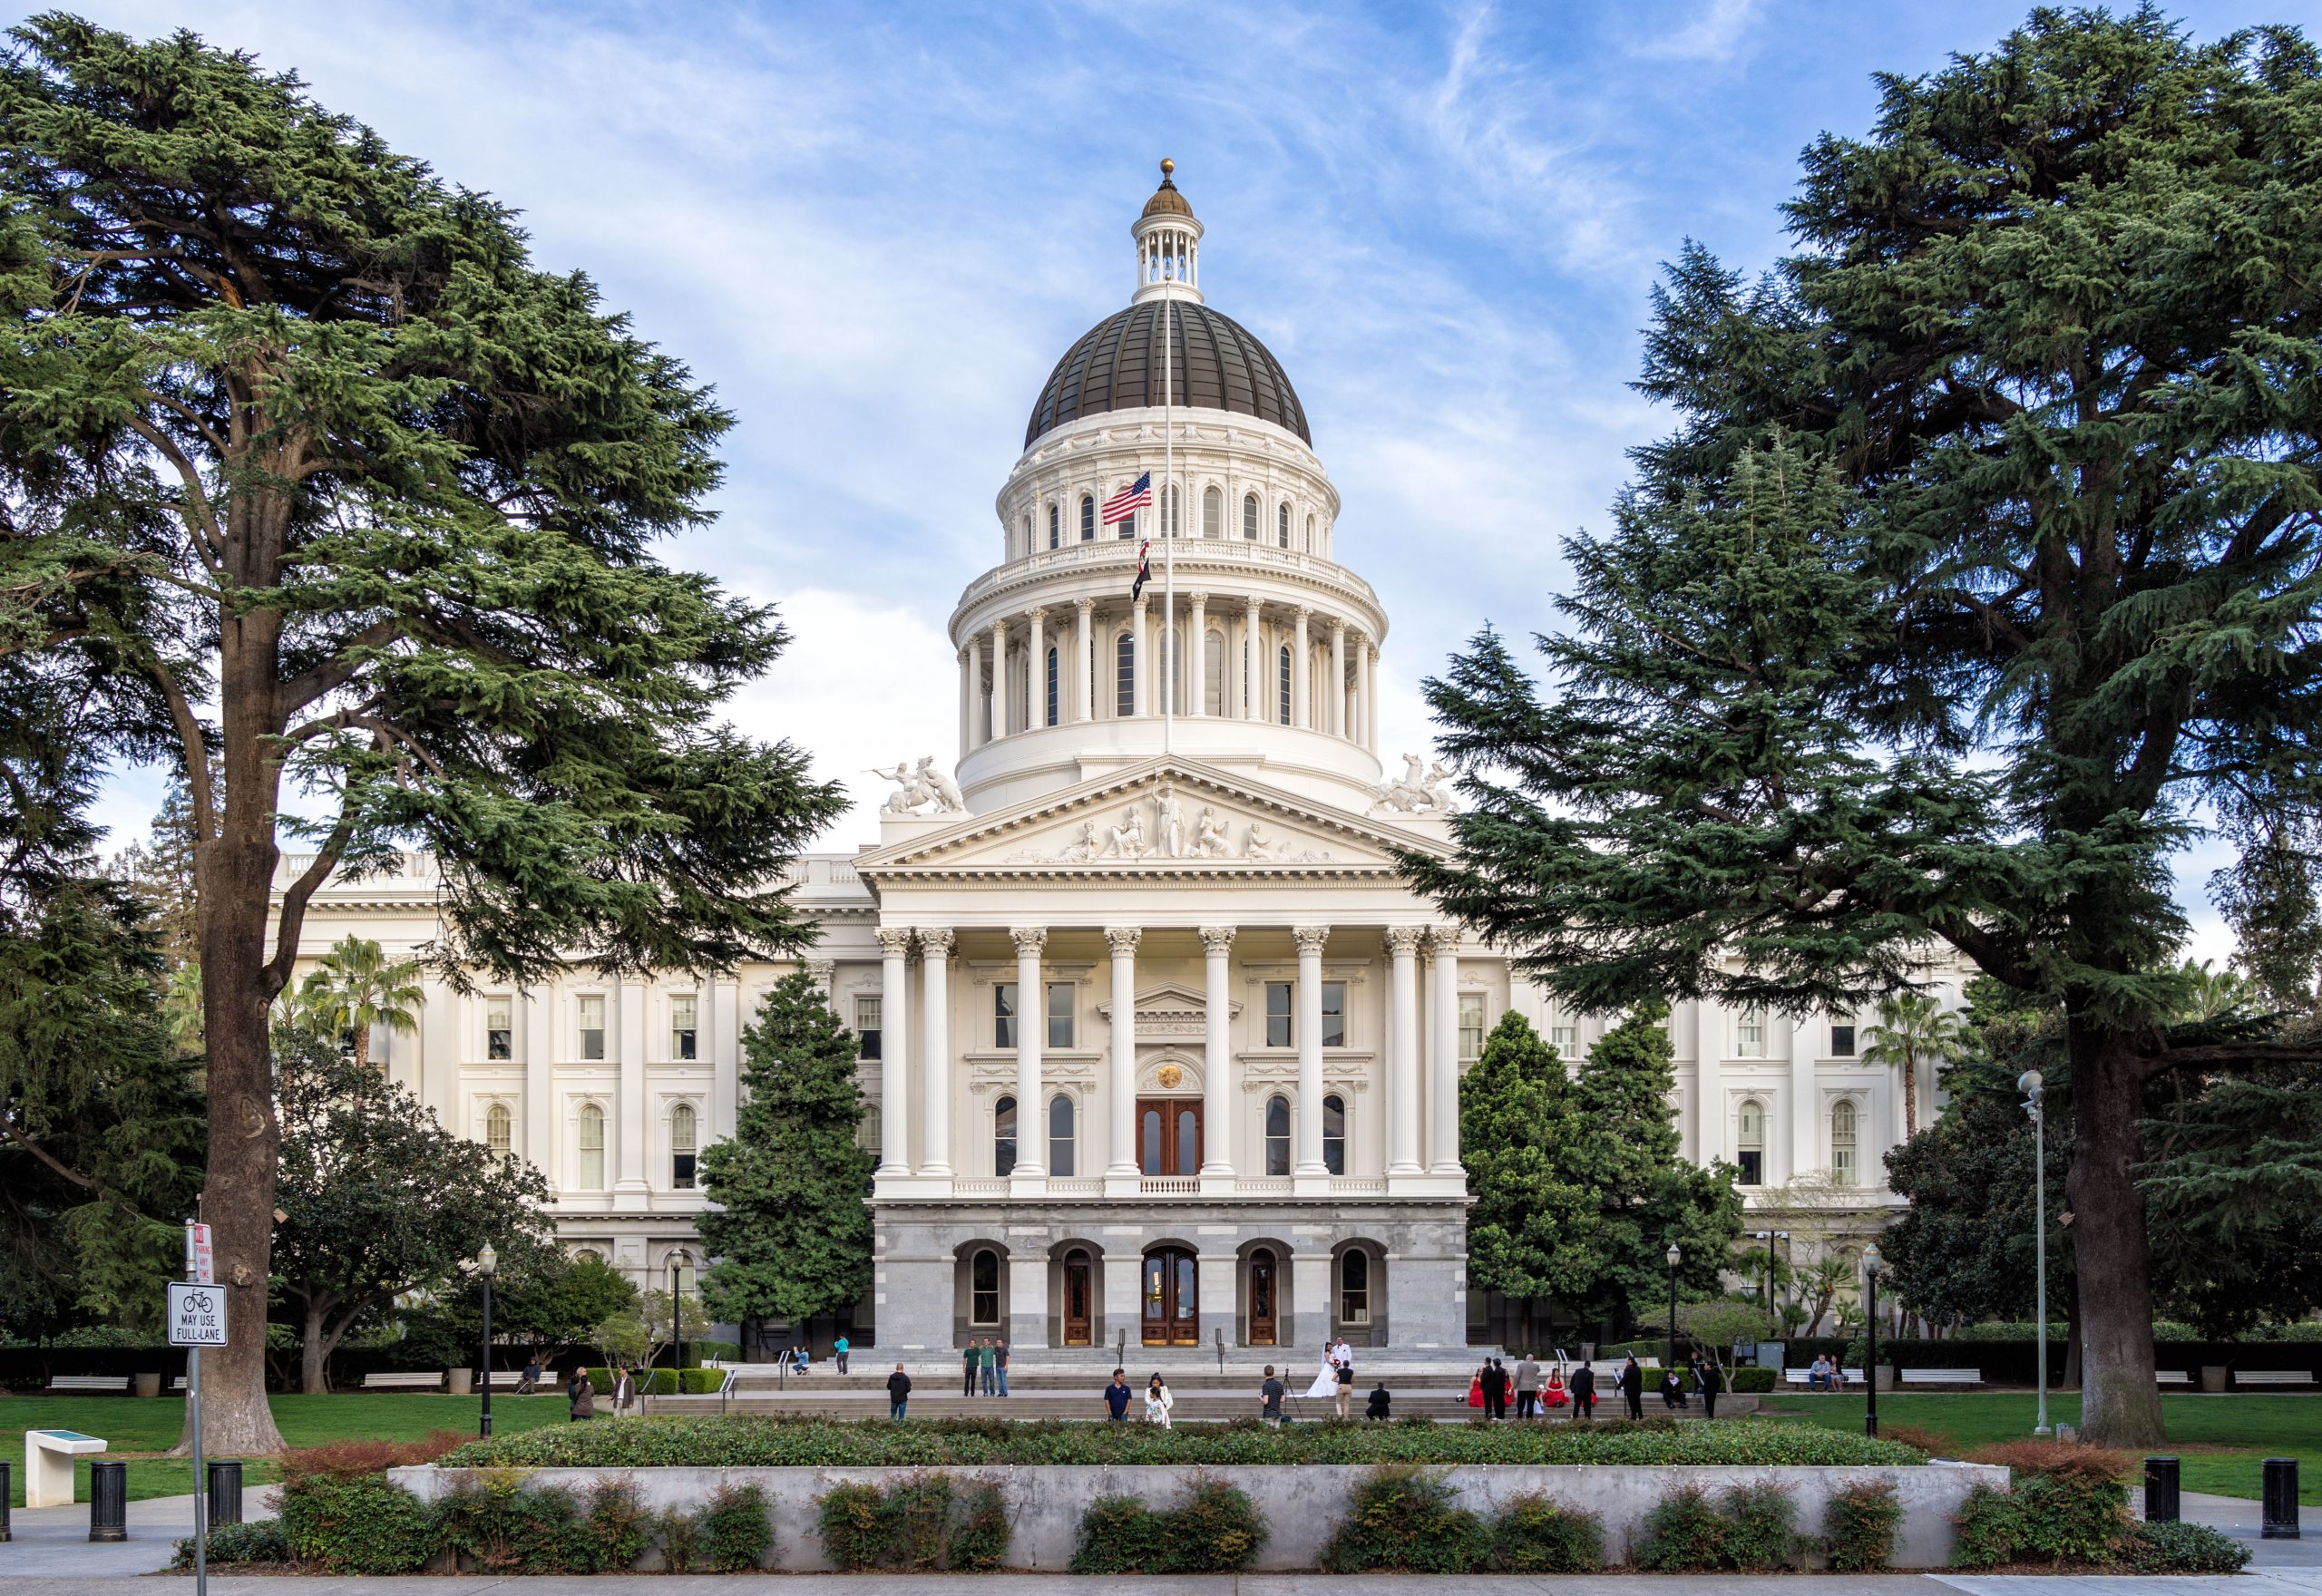 Save Our Capitol! Make your voice heard: A Free Public Forum to Mobilize Action